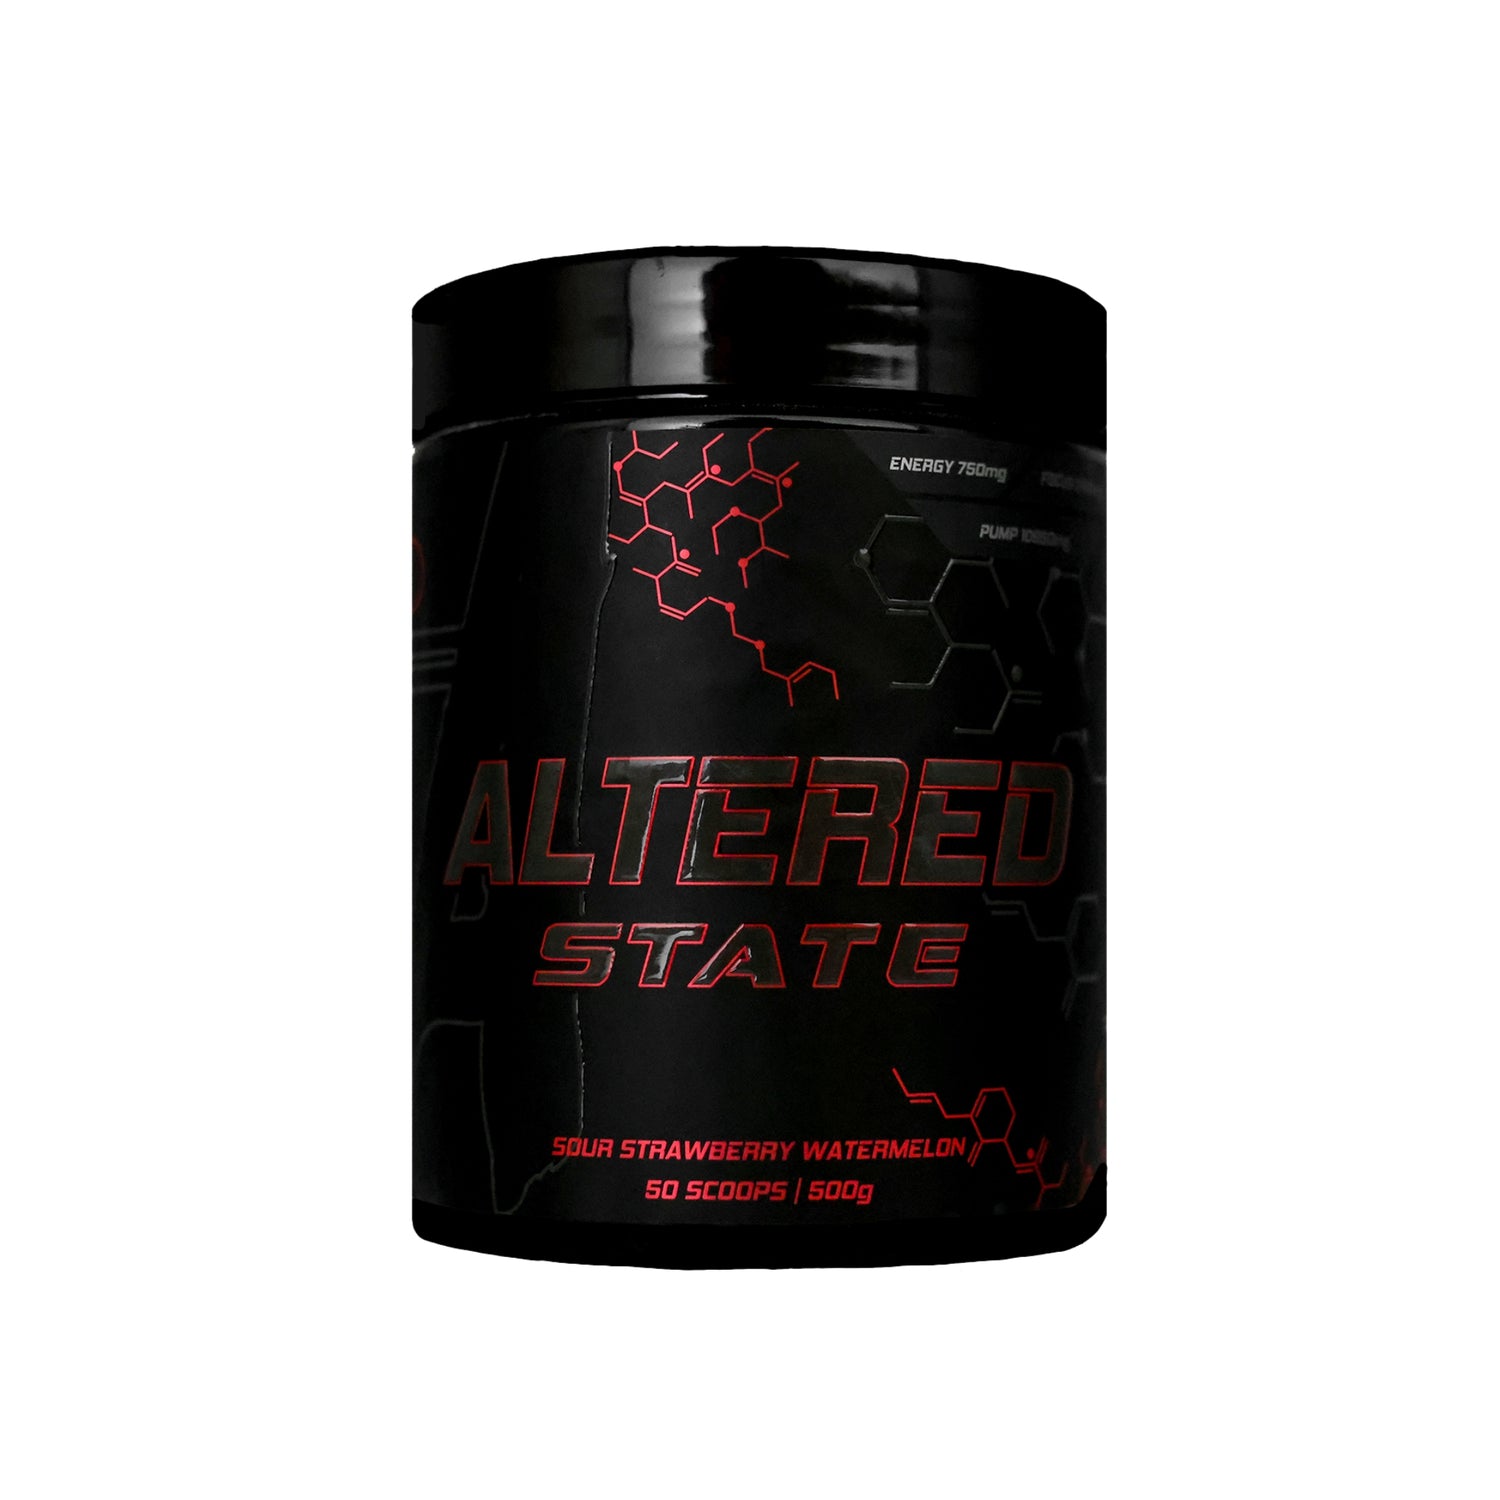 JDN Altered State - Sour Strawberry Watermelon